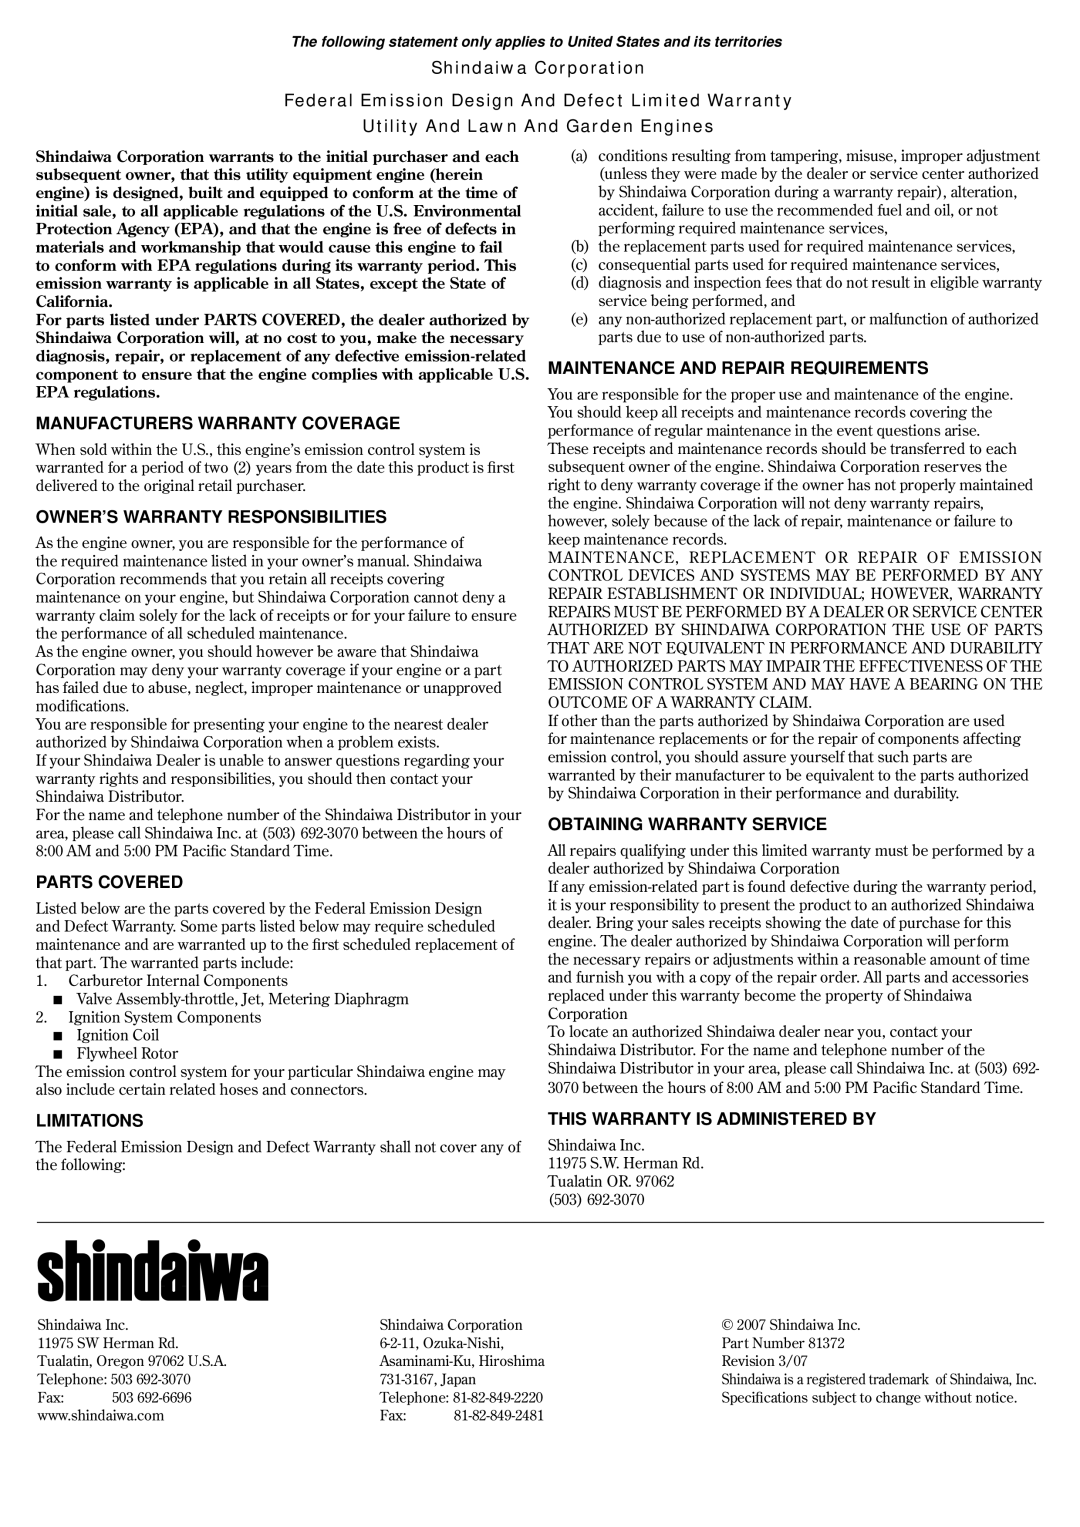 Shindaiwa T222 Shindaiwa Corporation, Utility And Lawn And Garden Engines, Manufacturers Warranty Coverage, Parts Covered 